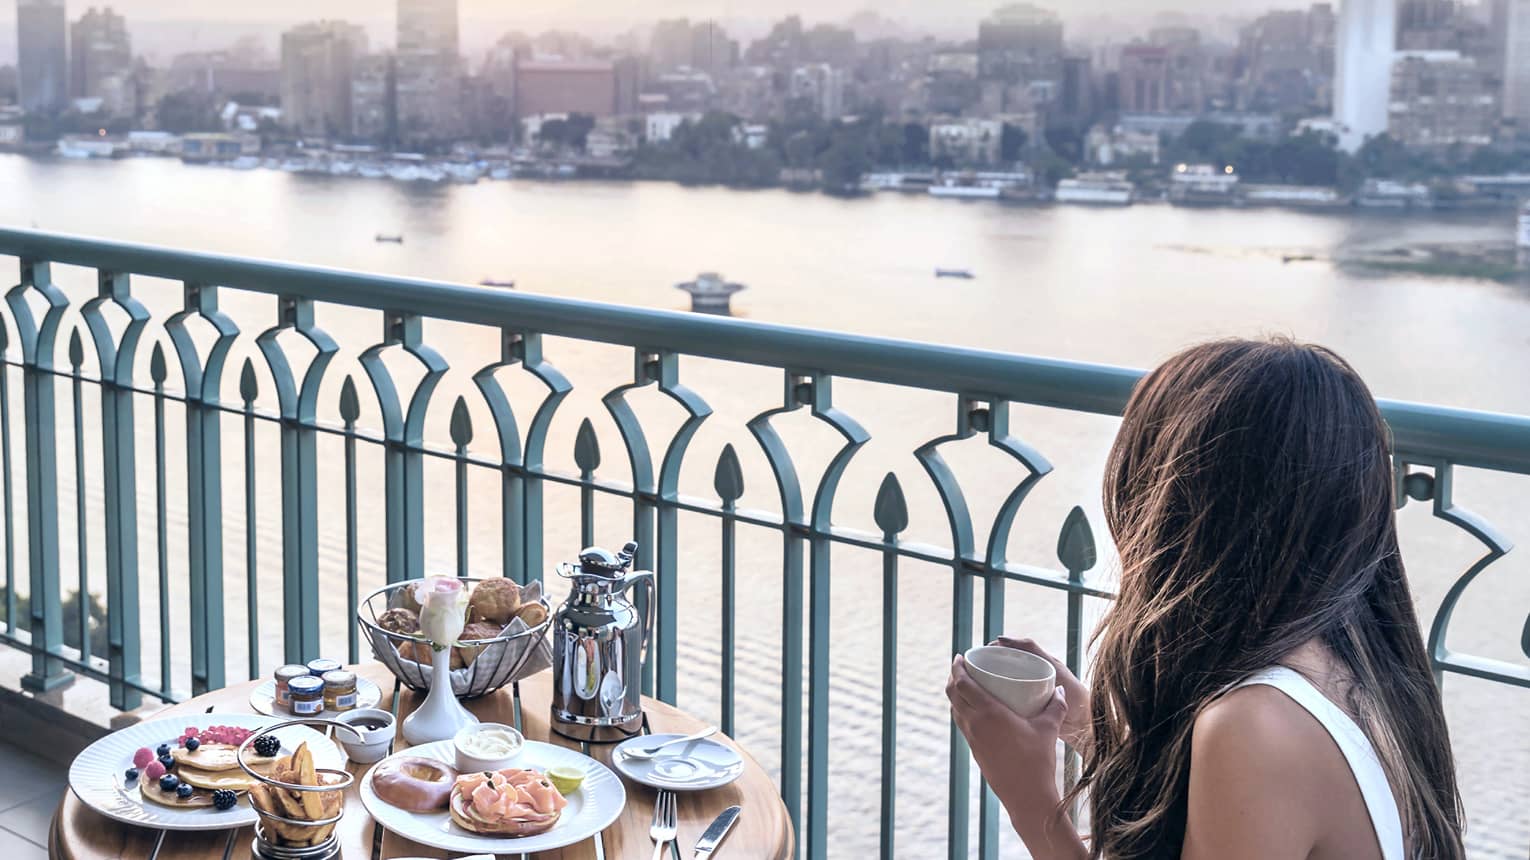 Dark-haired woman in white dress seated at balcony bistro table looking through railing at river and city views